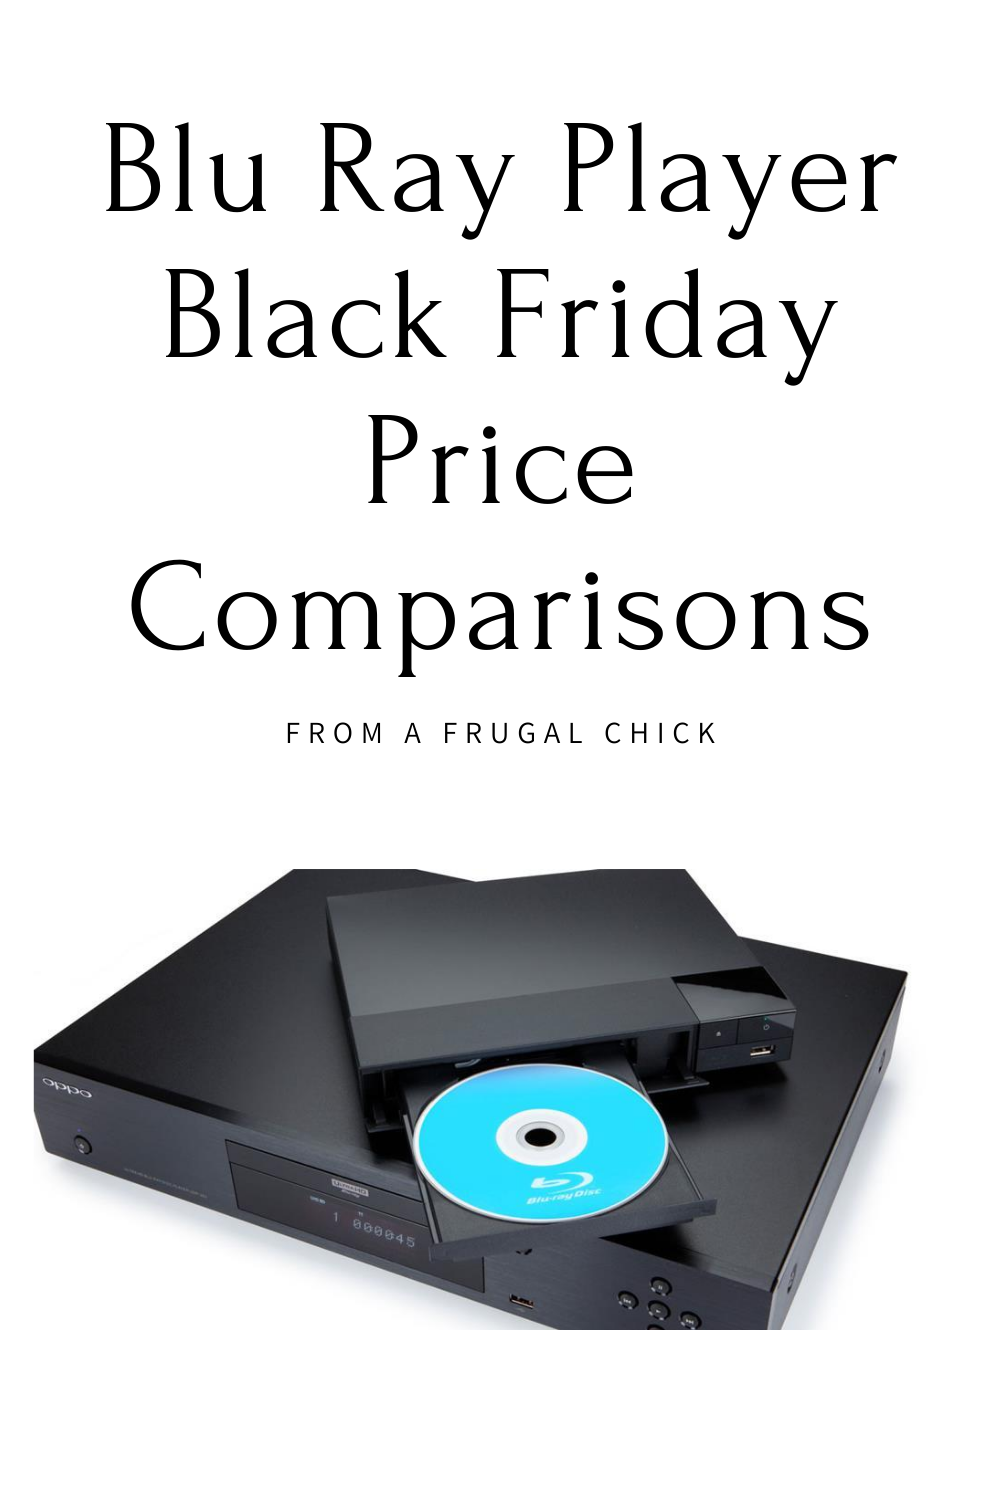 Blu Ray Player Black Friday Deals- If you are looking for a Blue Ray Player Black Friday deal we have them all from major retailers!